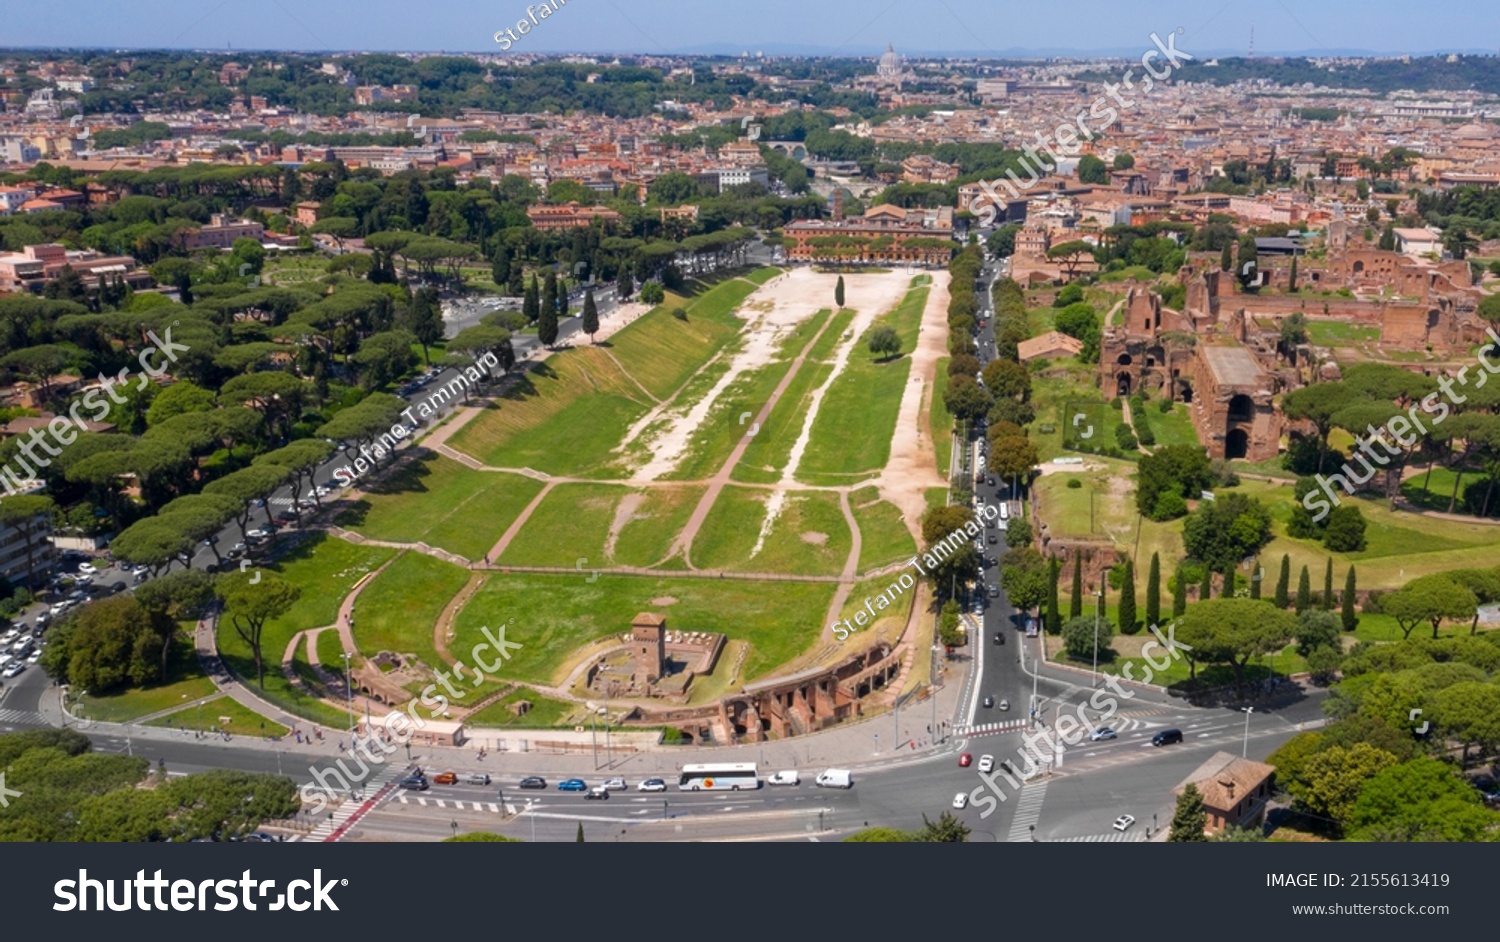 Aerial view of Circus Maximus, an ancient Roman chariot-racing stadium and mass entertainment venue in Rome, Italy. Now it's a public park but it was the first and largest stadium in ancient Rome. #2155613419